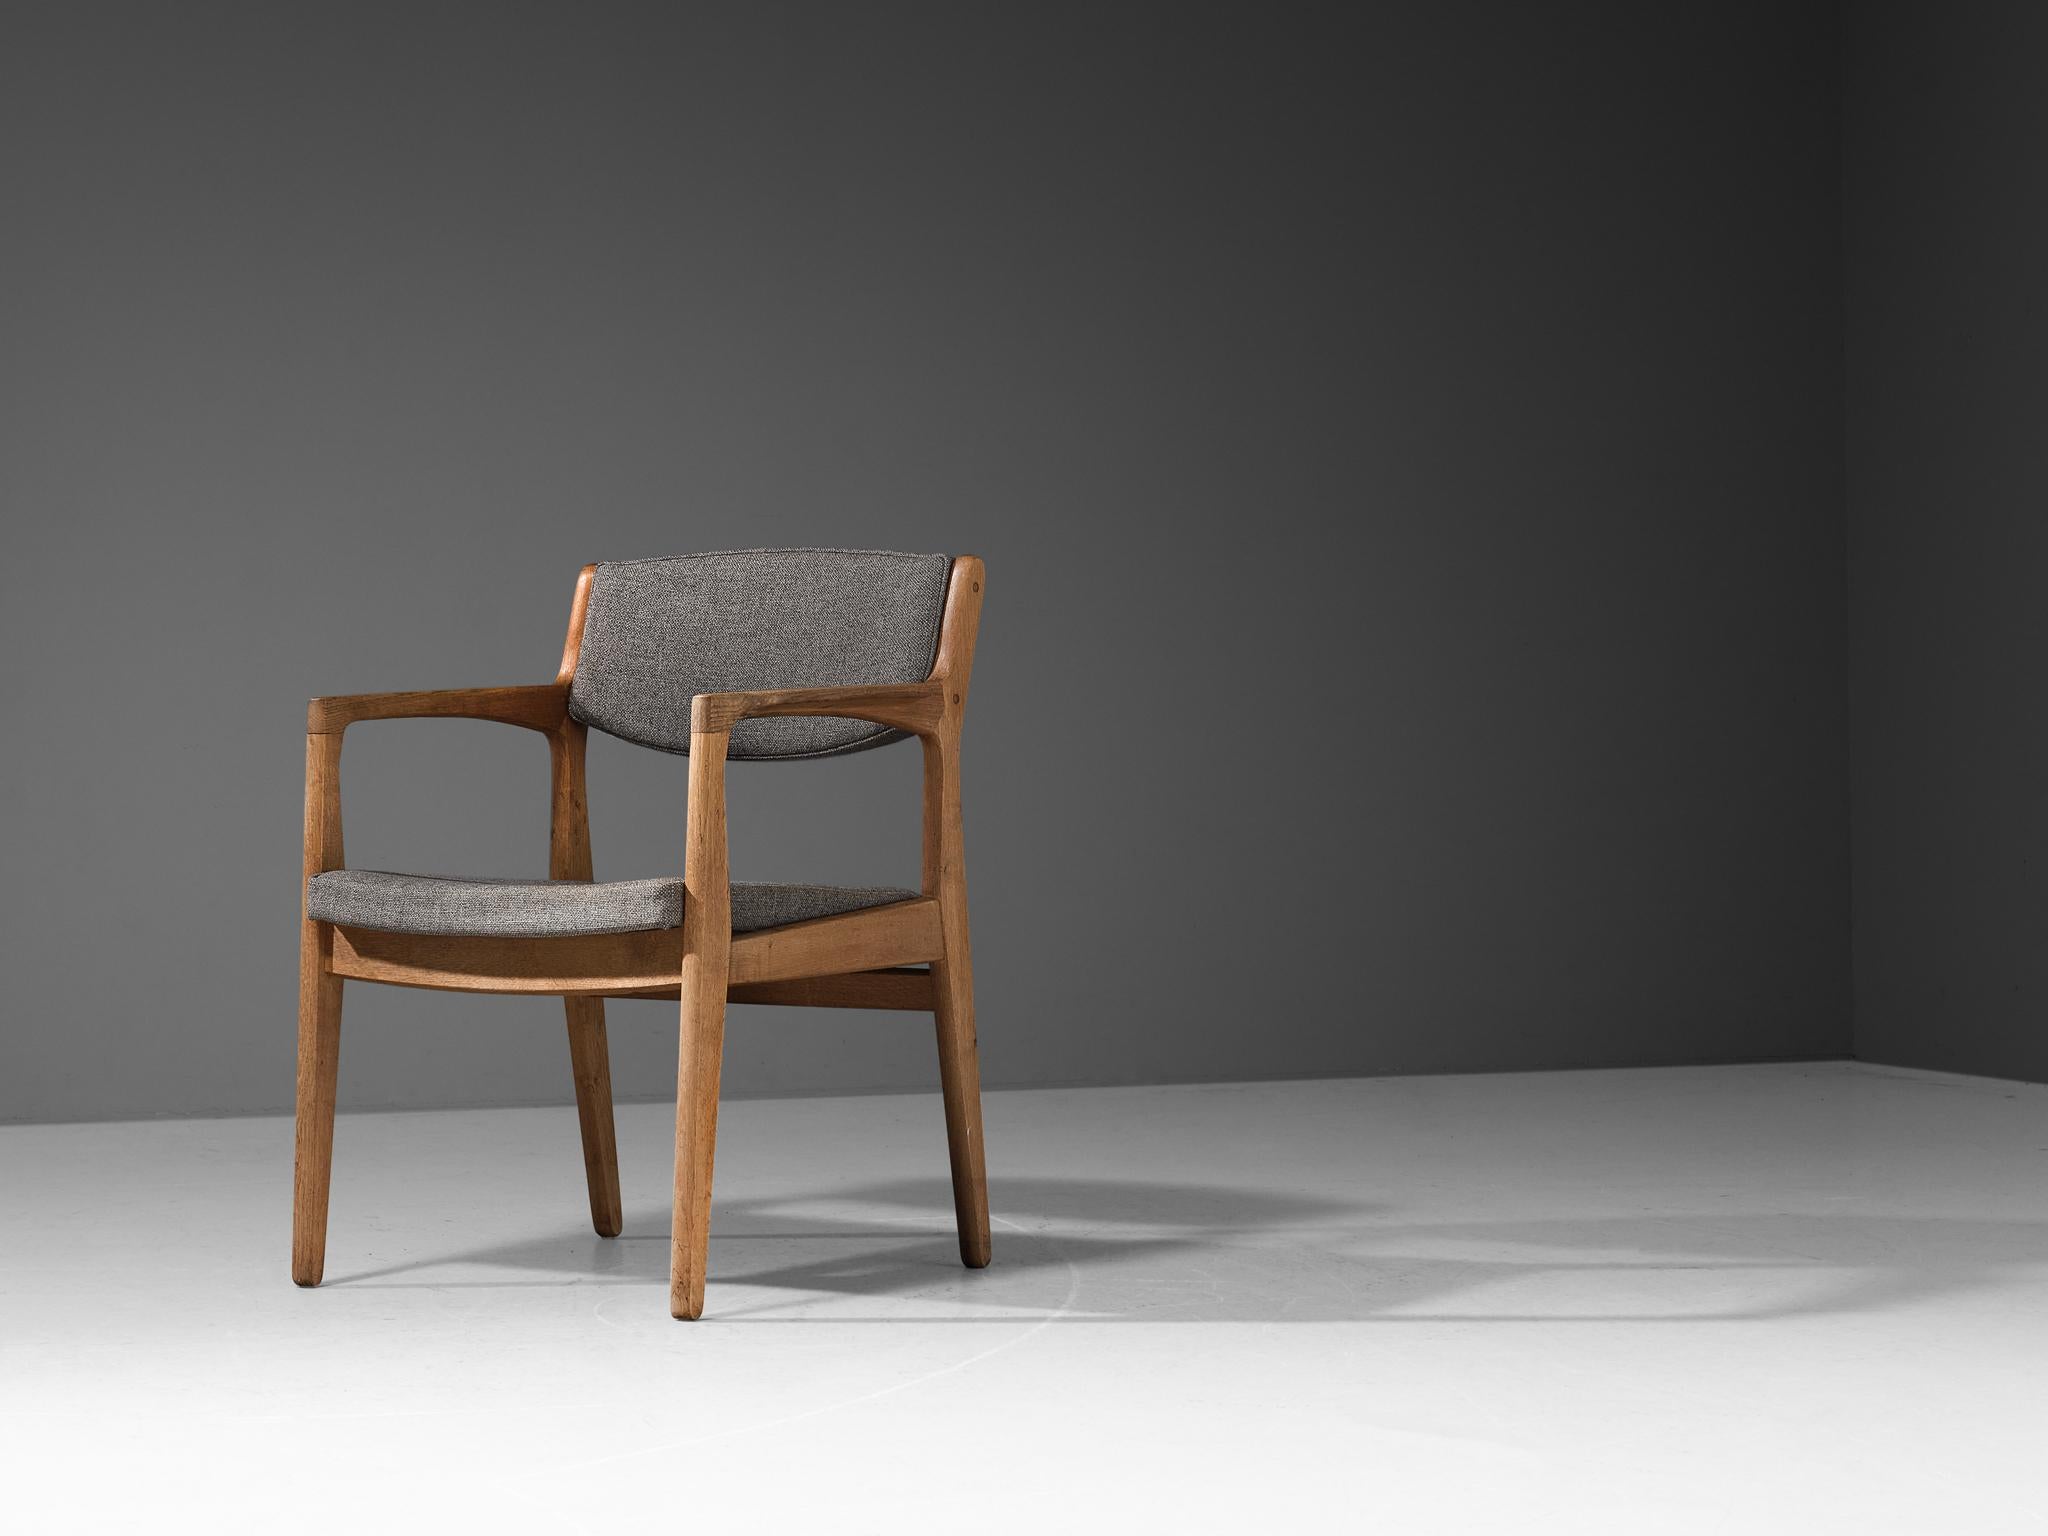 Armchair, oak, fabric, Denmark, 1960s. 

The style of this armchair is characterized by simplified lines, absence of decoration and the use of neutral materials that are in great harmony. The sculpted frame proofs the great eye for detail and